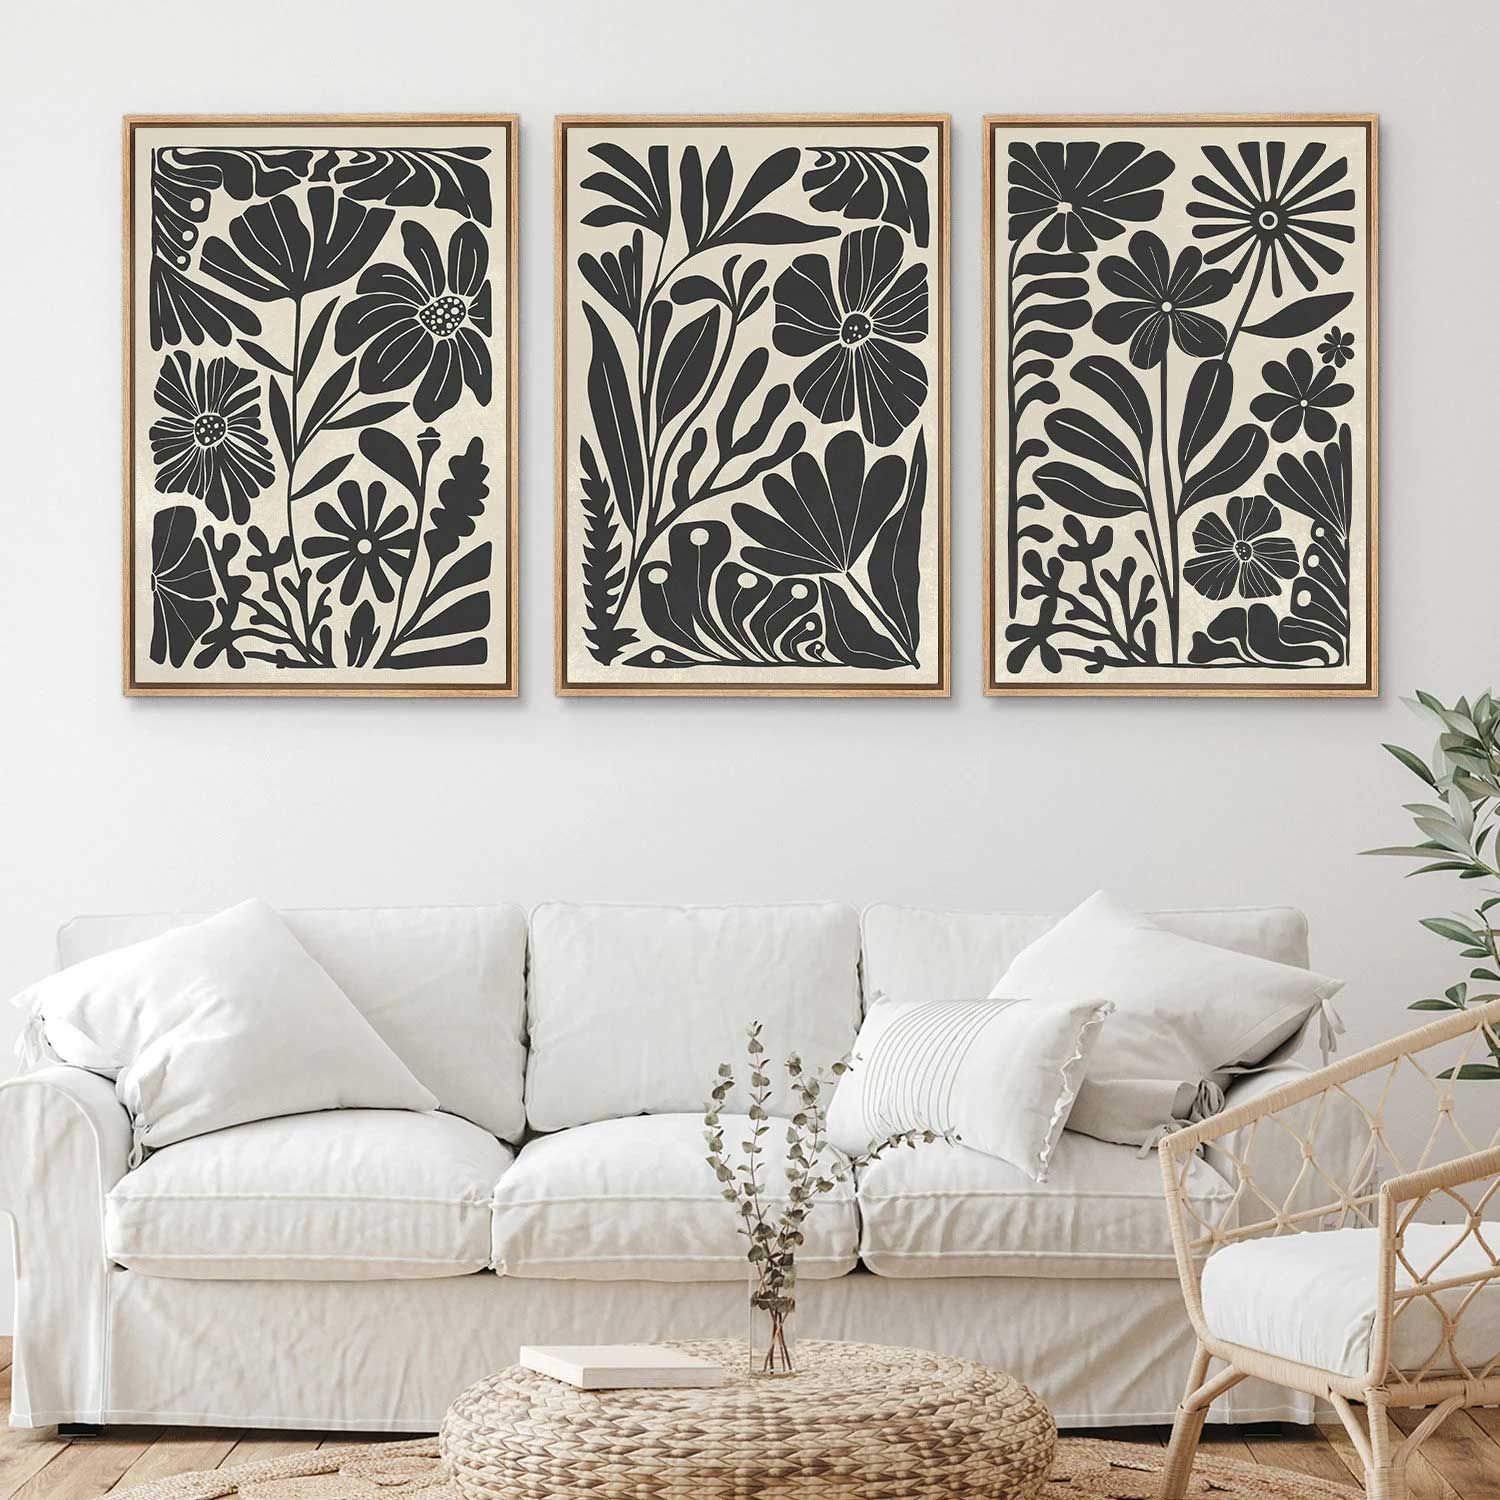 Framed Modern Abstract Floral Botanical Prints Canvas Wall Art | Yedwo